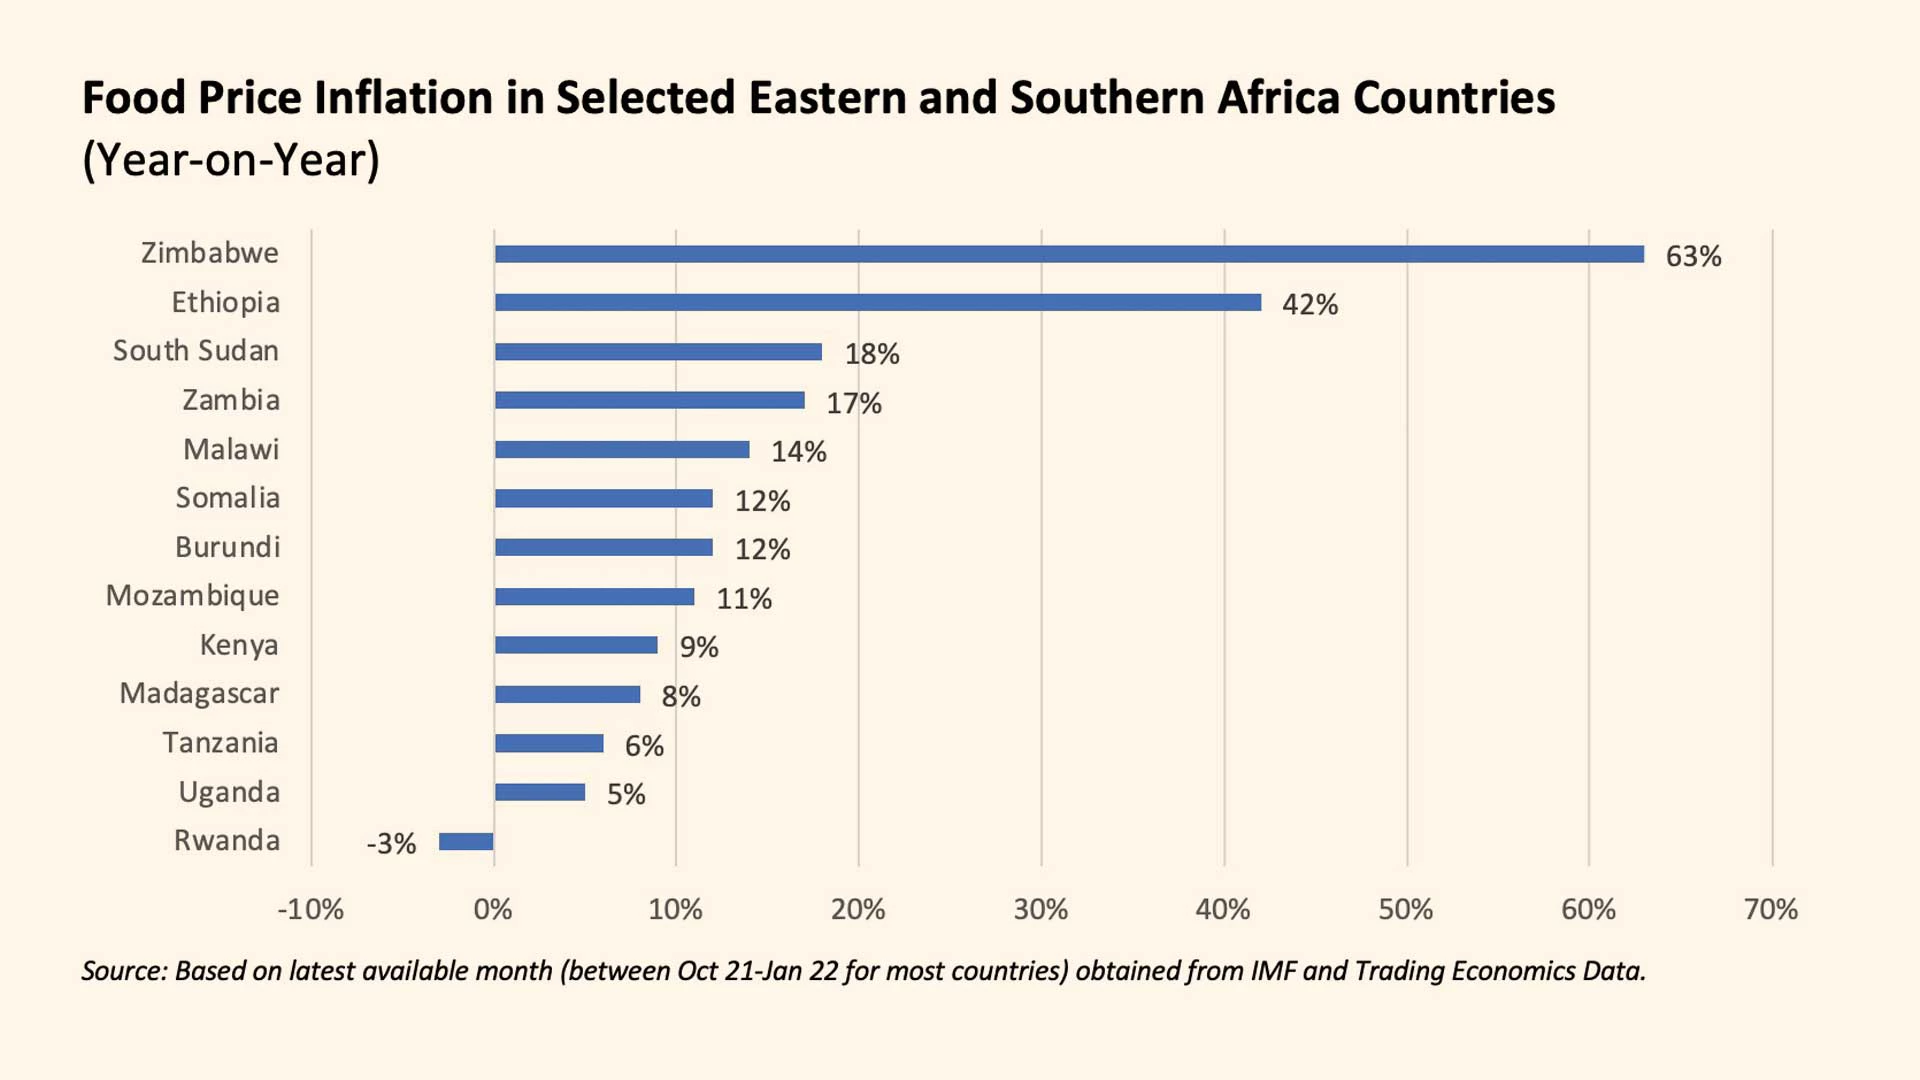 Food Price Inflation in Selected Eastern and Southern Africa Countries (Year-on-Year)